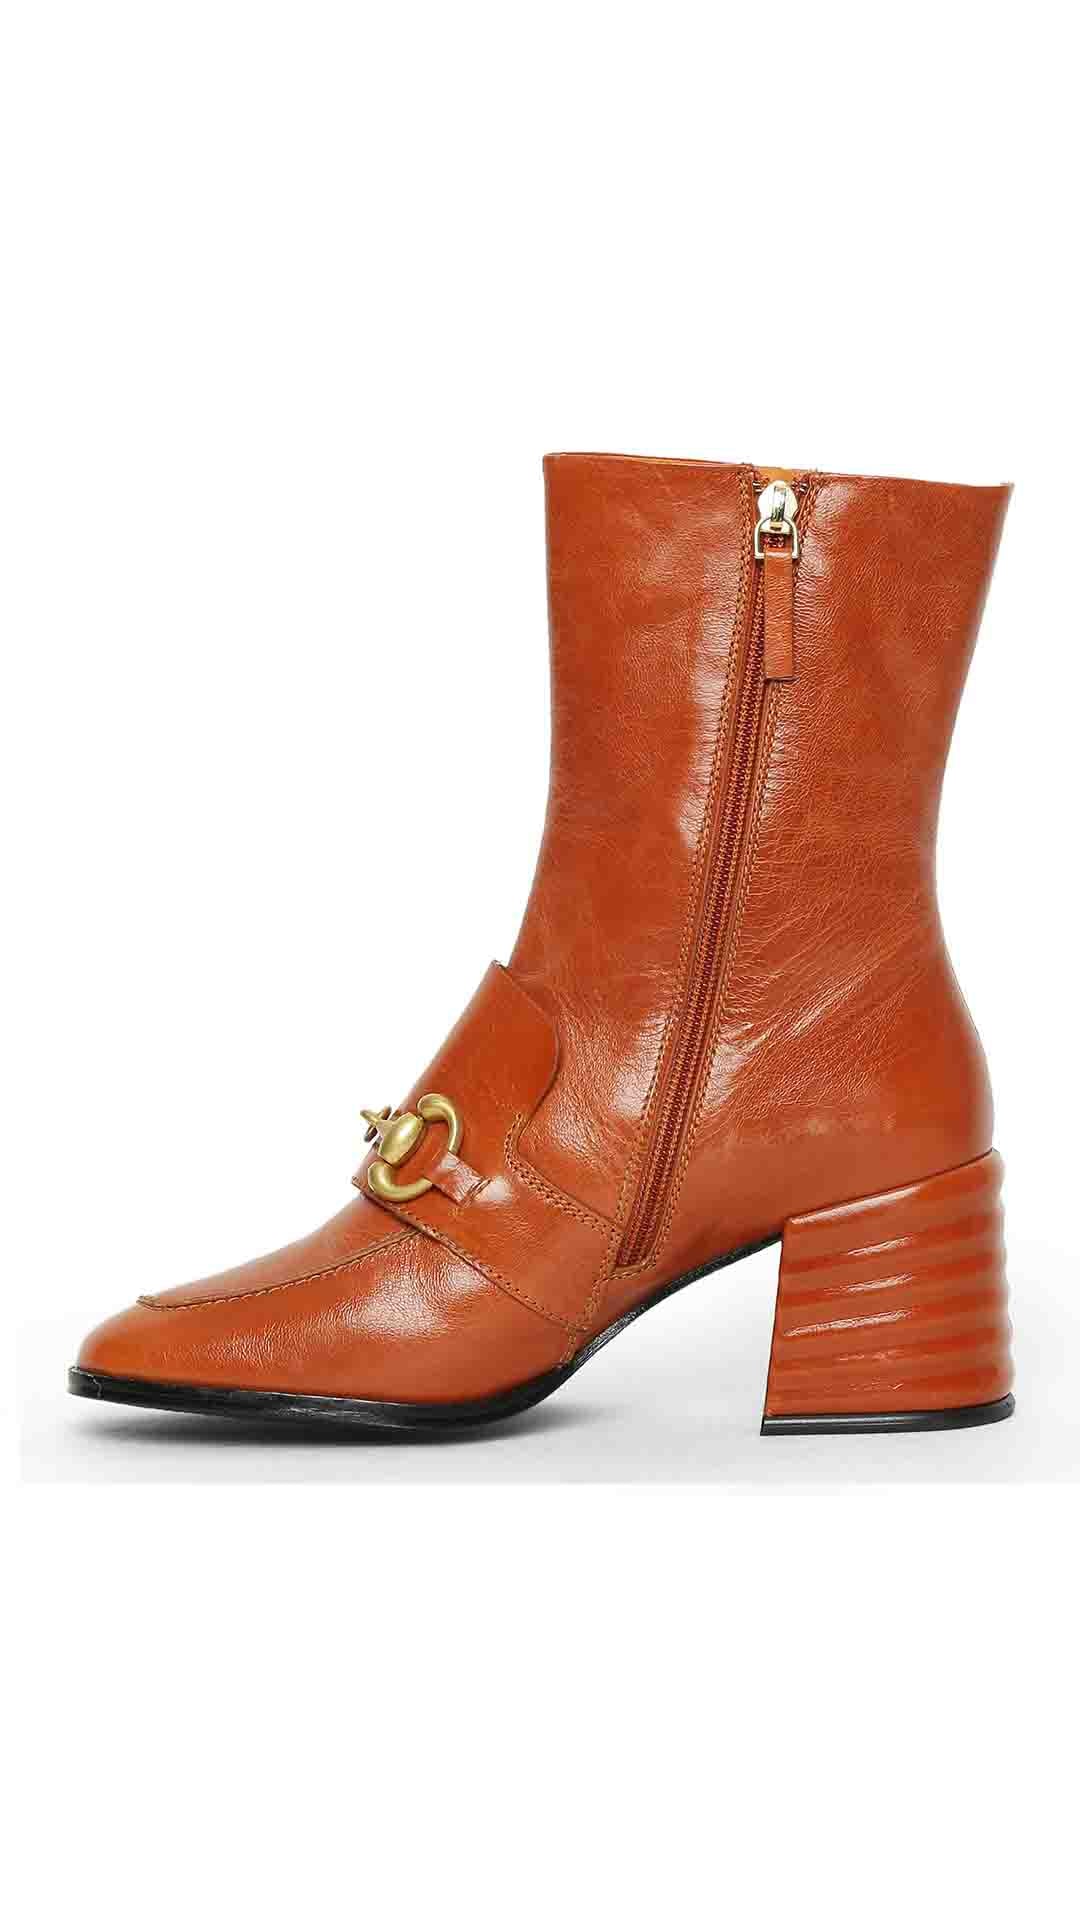 Saint Ambrosia Rust Distressed Leather High Ankle Boots - Stylish and rugged footwear with a vintage touch for a bold fashion statement